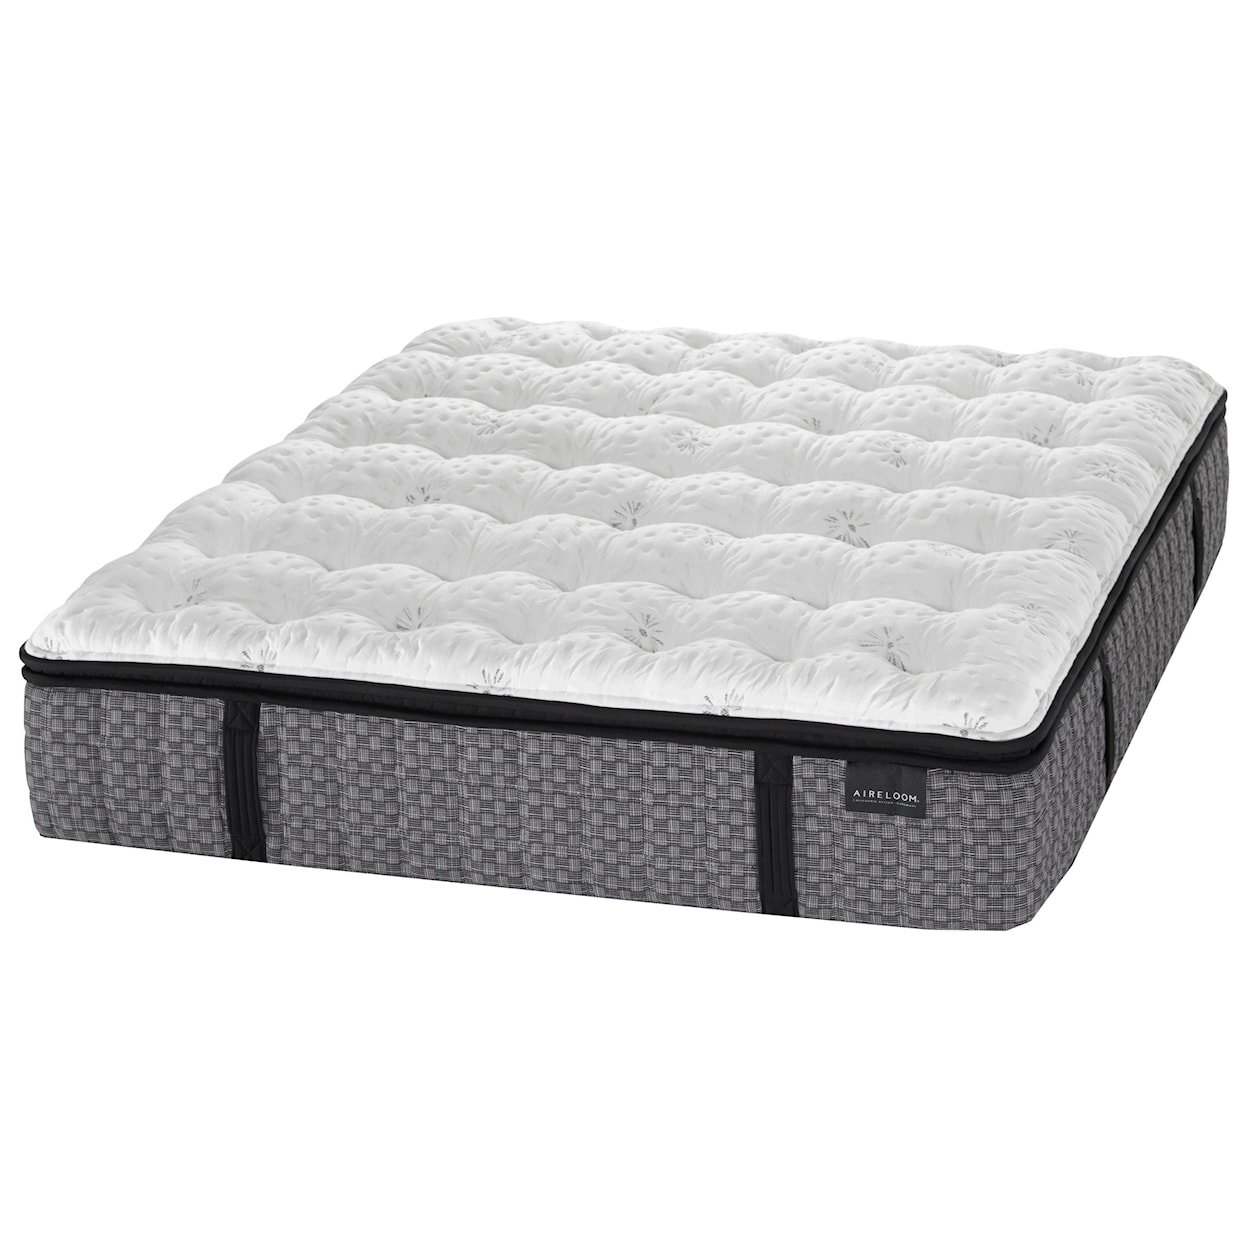 Aireloom Bedding Humbolt Plush King Coil on Coil Mattress